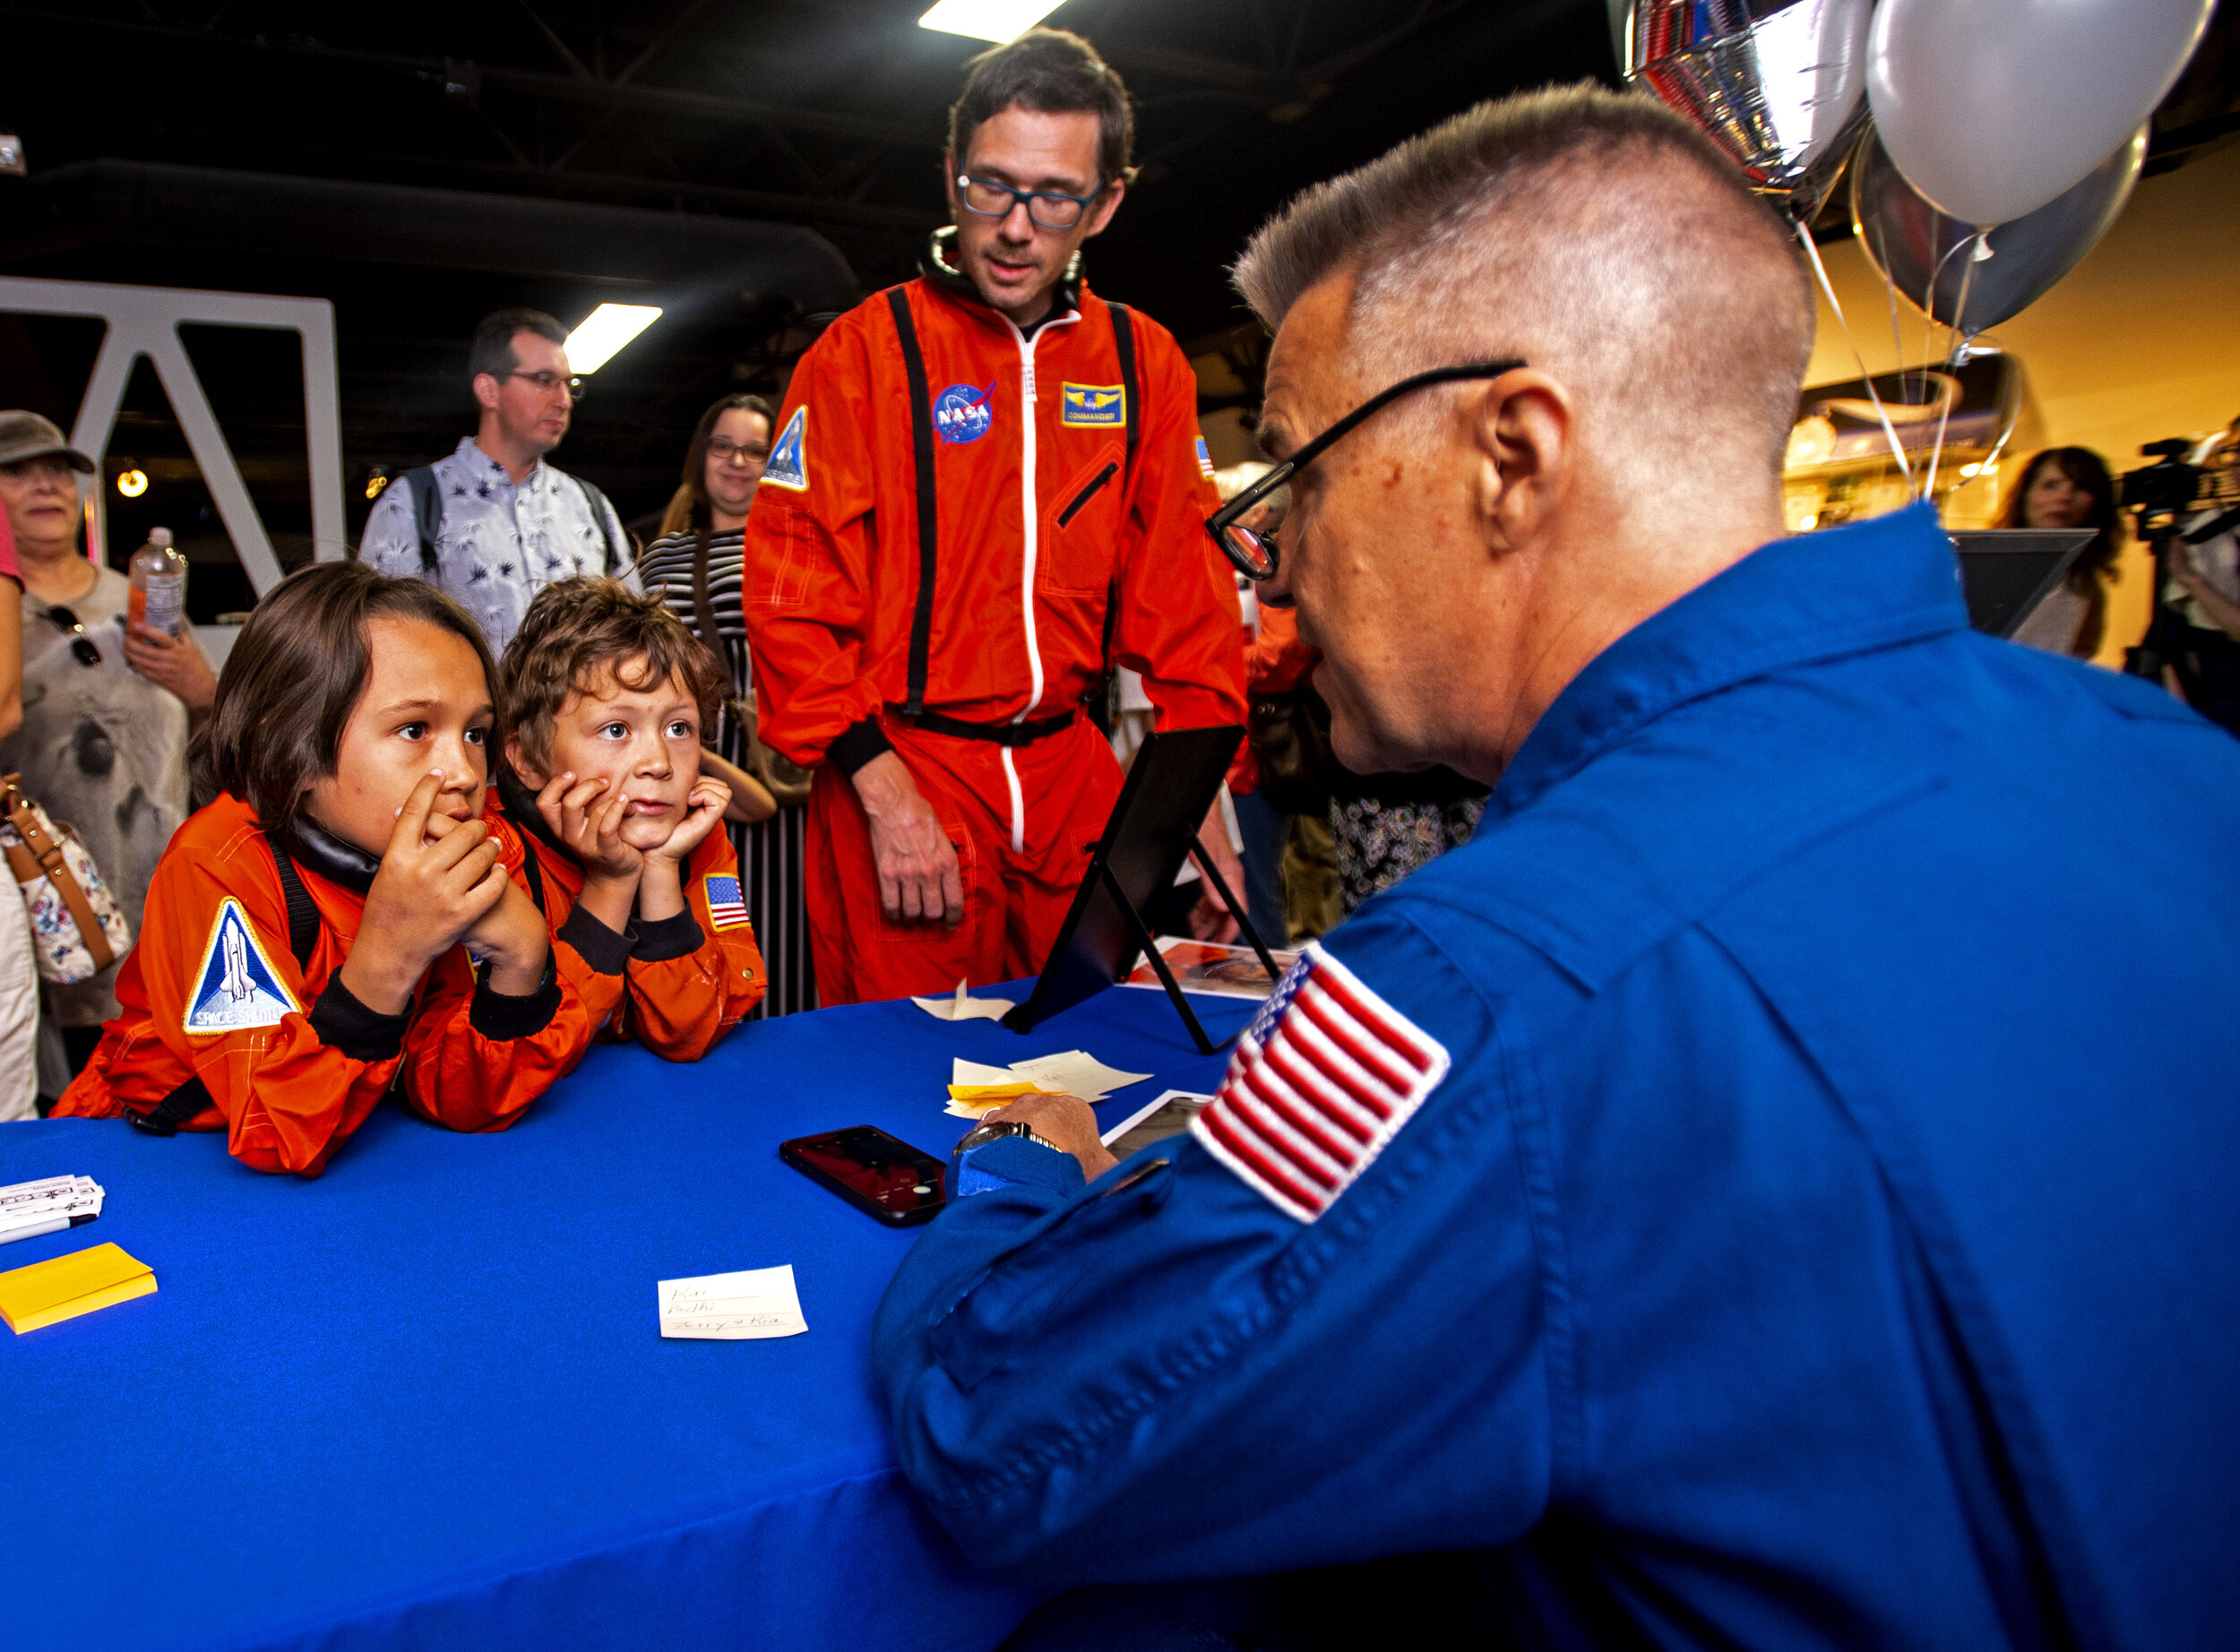  From left, Bodhi and Kai Cabeen lean in while talking with astronaut Duane Carey at the Space Foundation Discovery Center's celebration of the 50th anniversary of Neil Armstrong and Buzz Aldrin's walk on the moon Saturday, July 20, 2019, in Colorado